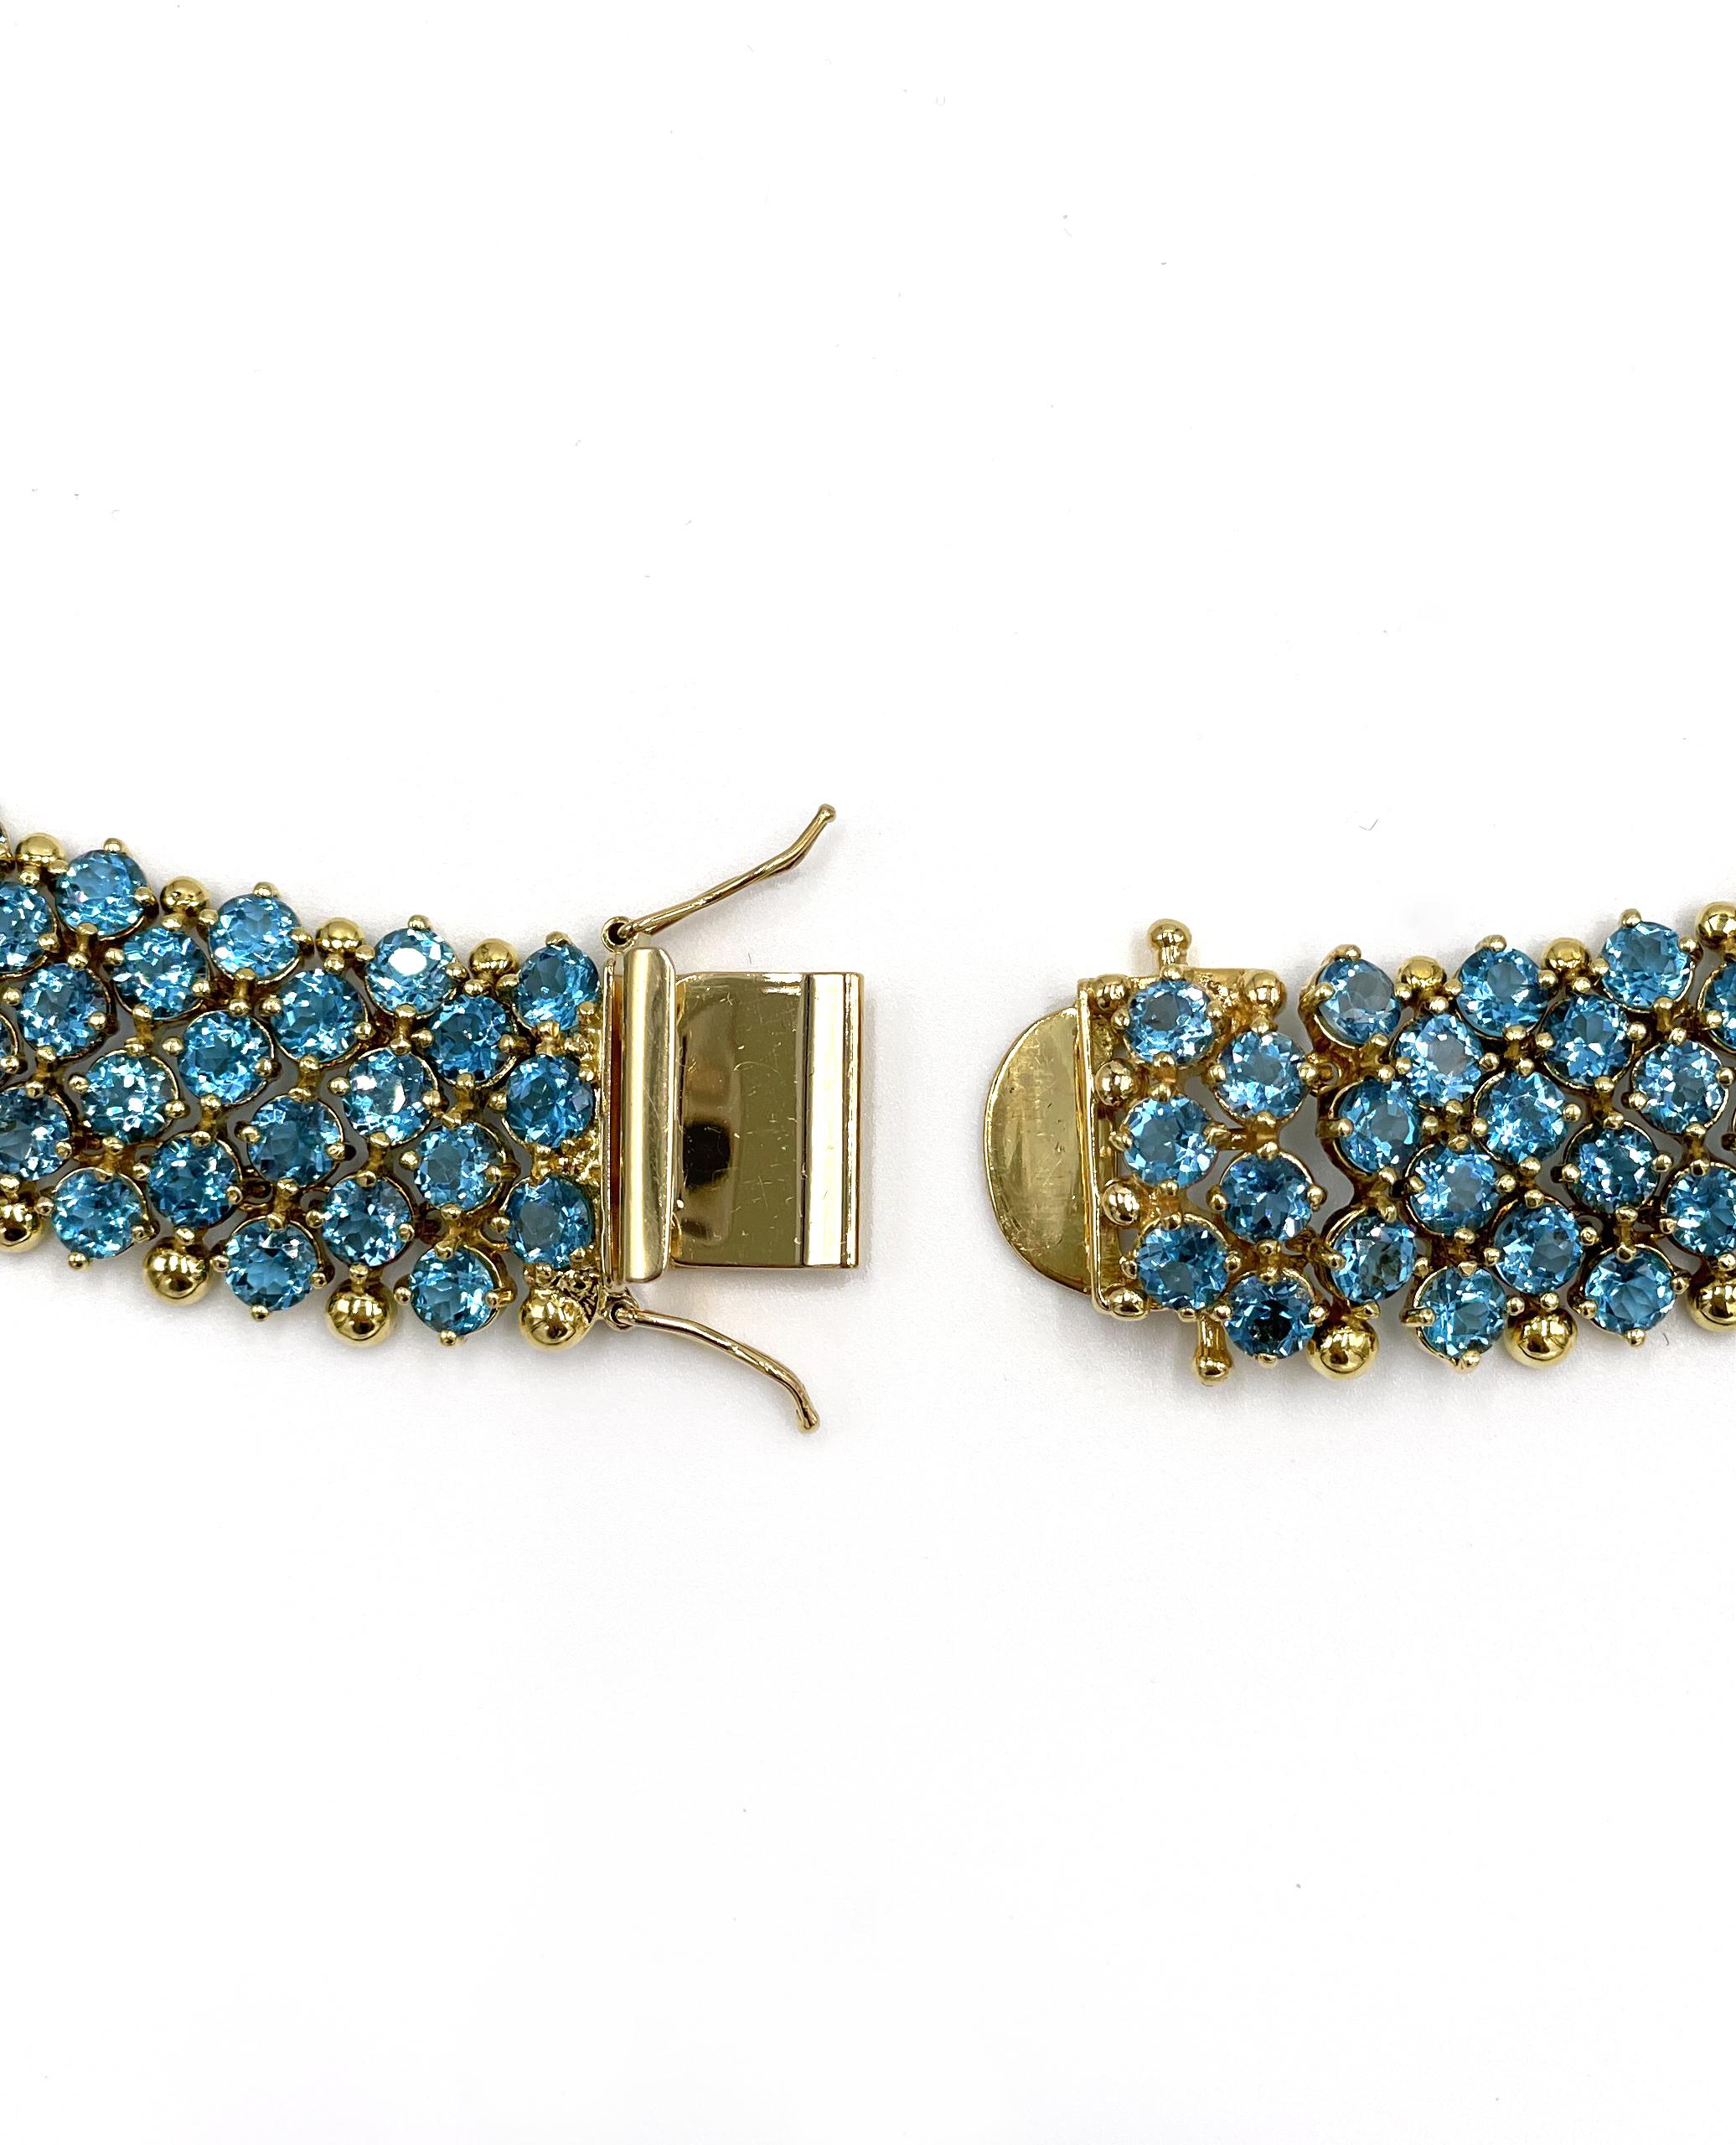 Women's Exquisite 18k Collar Necklace with Blue Topaz For Sale